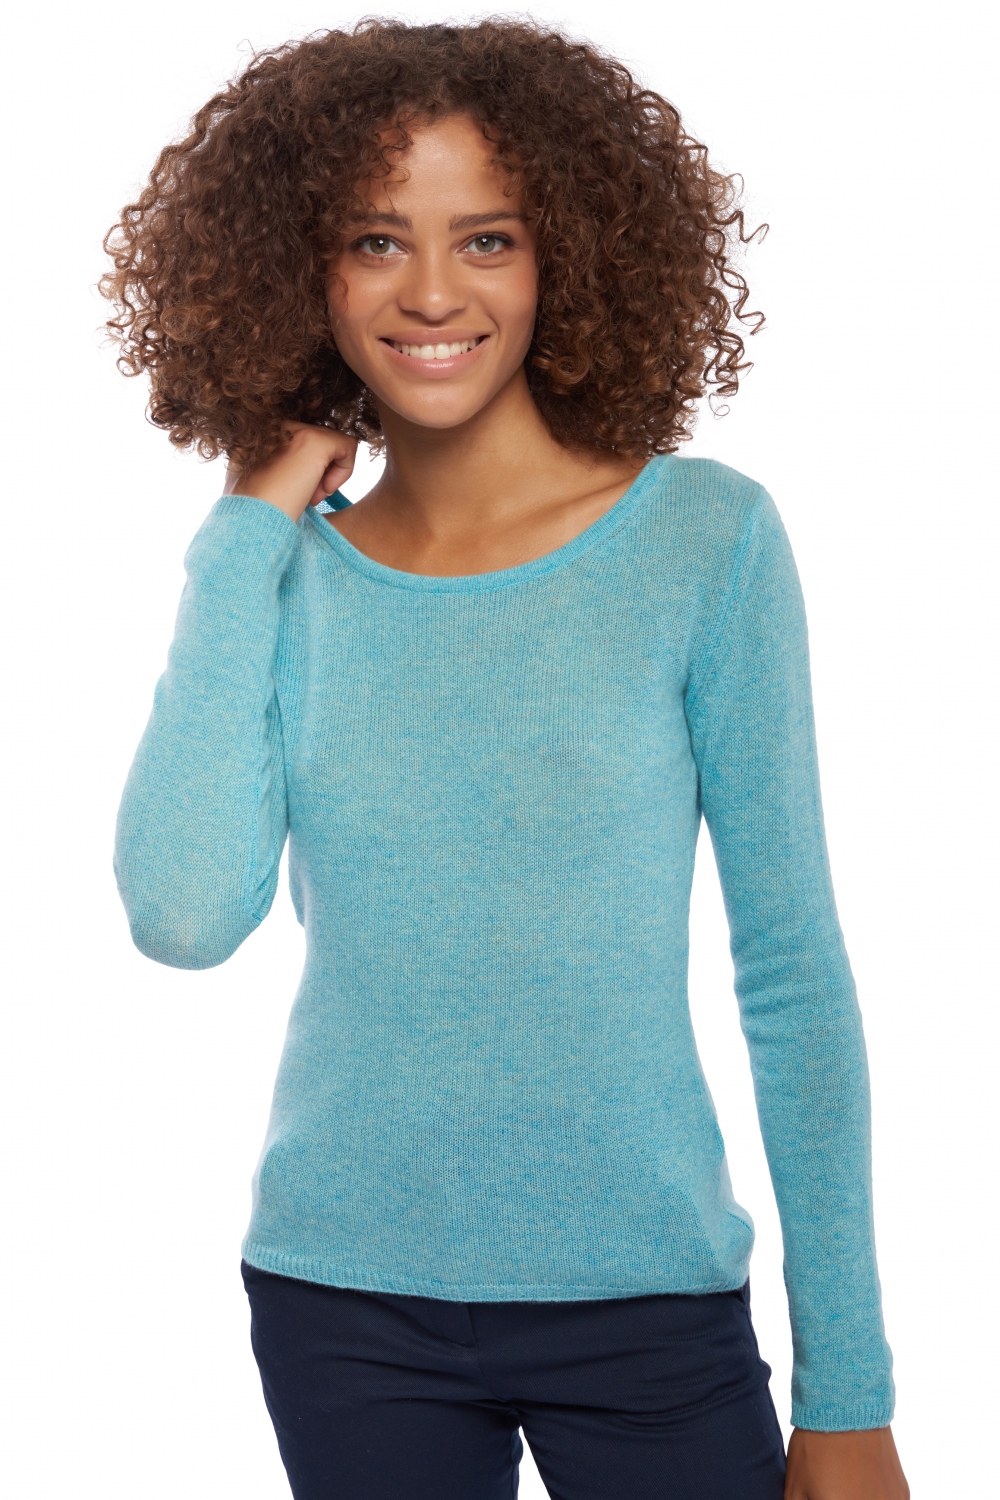 Cashmere ladies basic sweaters at low prices caleen piscine s